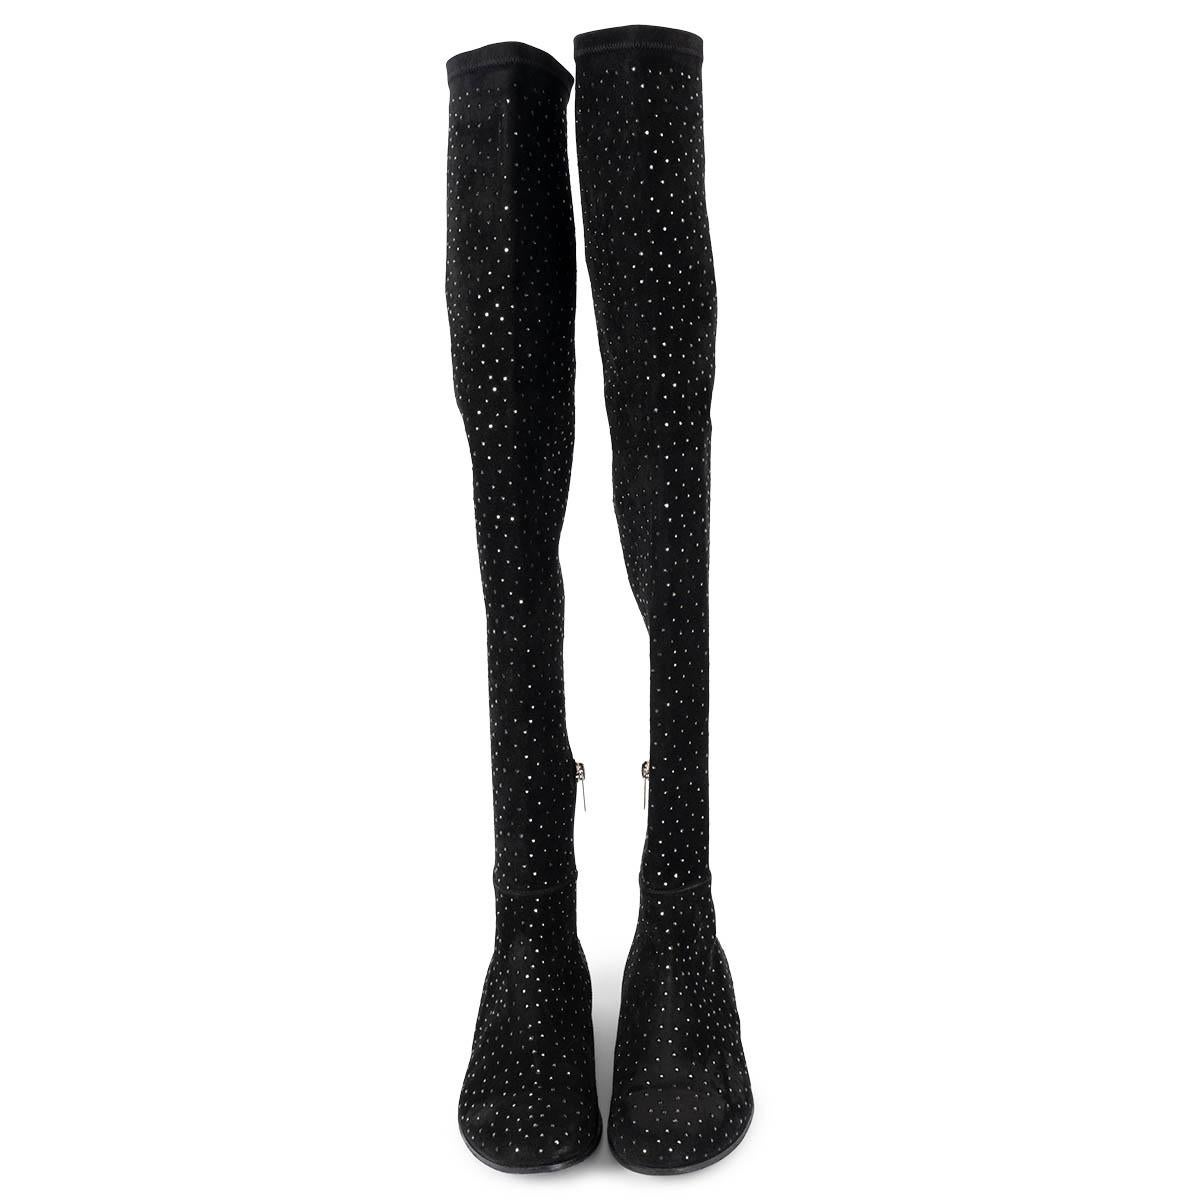 100% authentic Jimmy Choo Myren crystal-embellished over-knee boots in black stretchy suede. Open with a short inside zip. Have been worn and are in excellent condition. 

Measurements
Imprinted Size	37.5
Shoe Size	37.5
Inside Sole	24.5cm